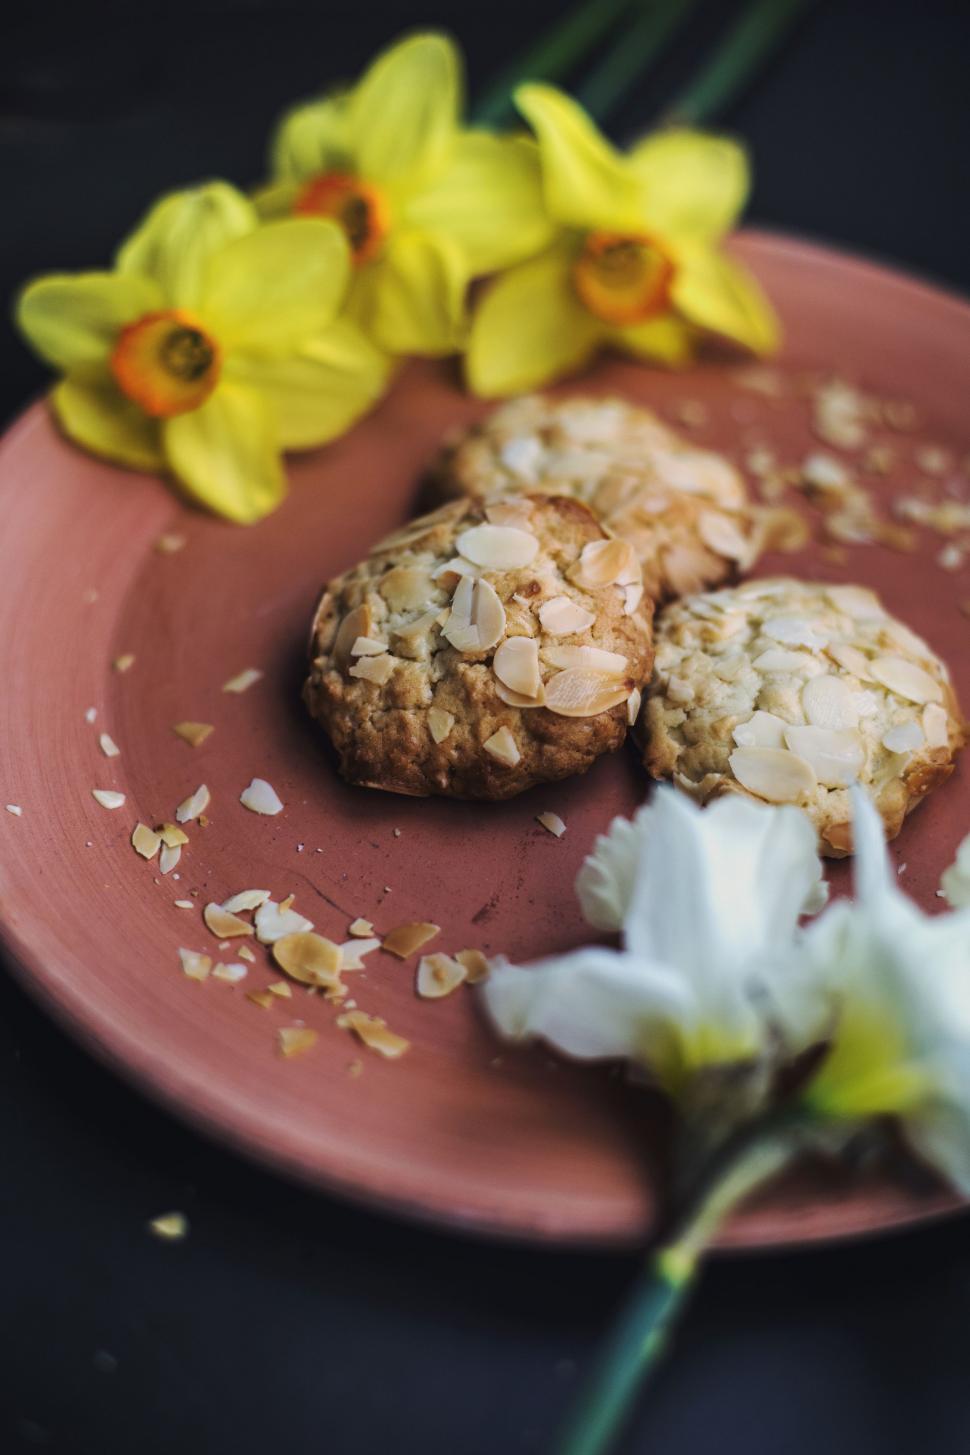 Free Image of Pink Plate With Cookies and Flowers 